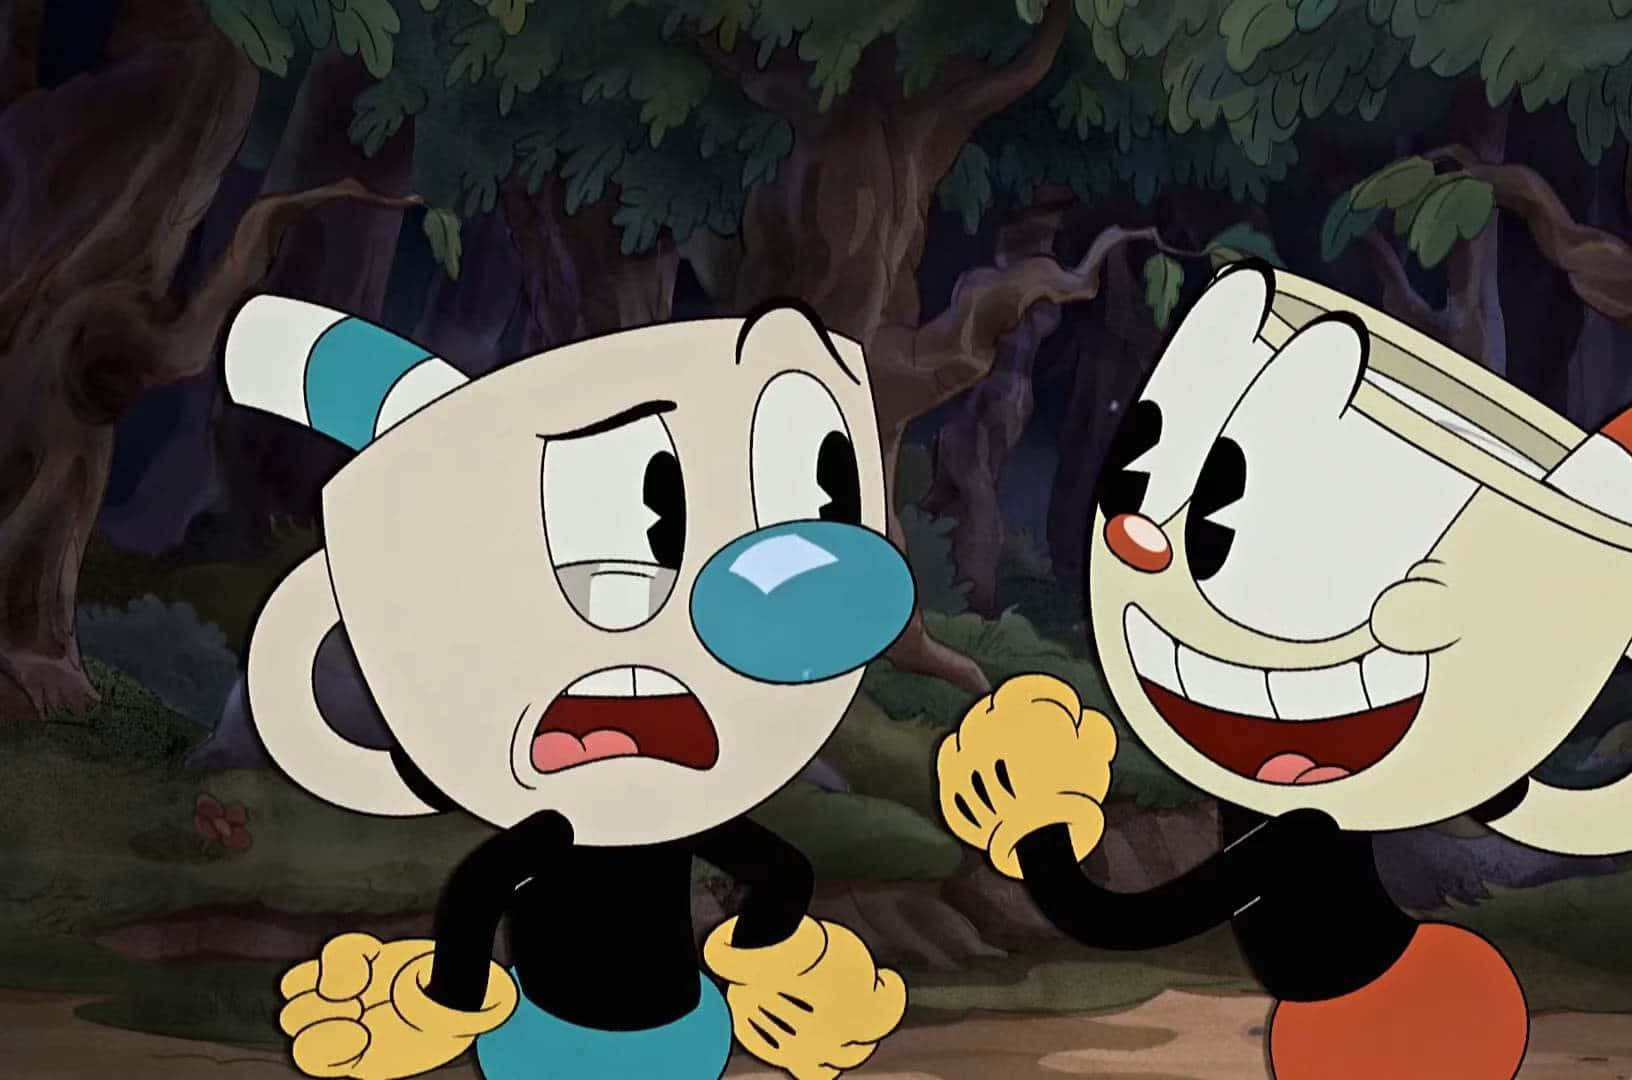 Have a blast playing as Cuphead!